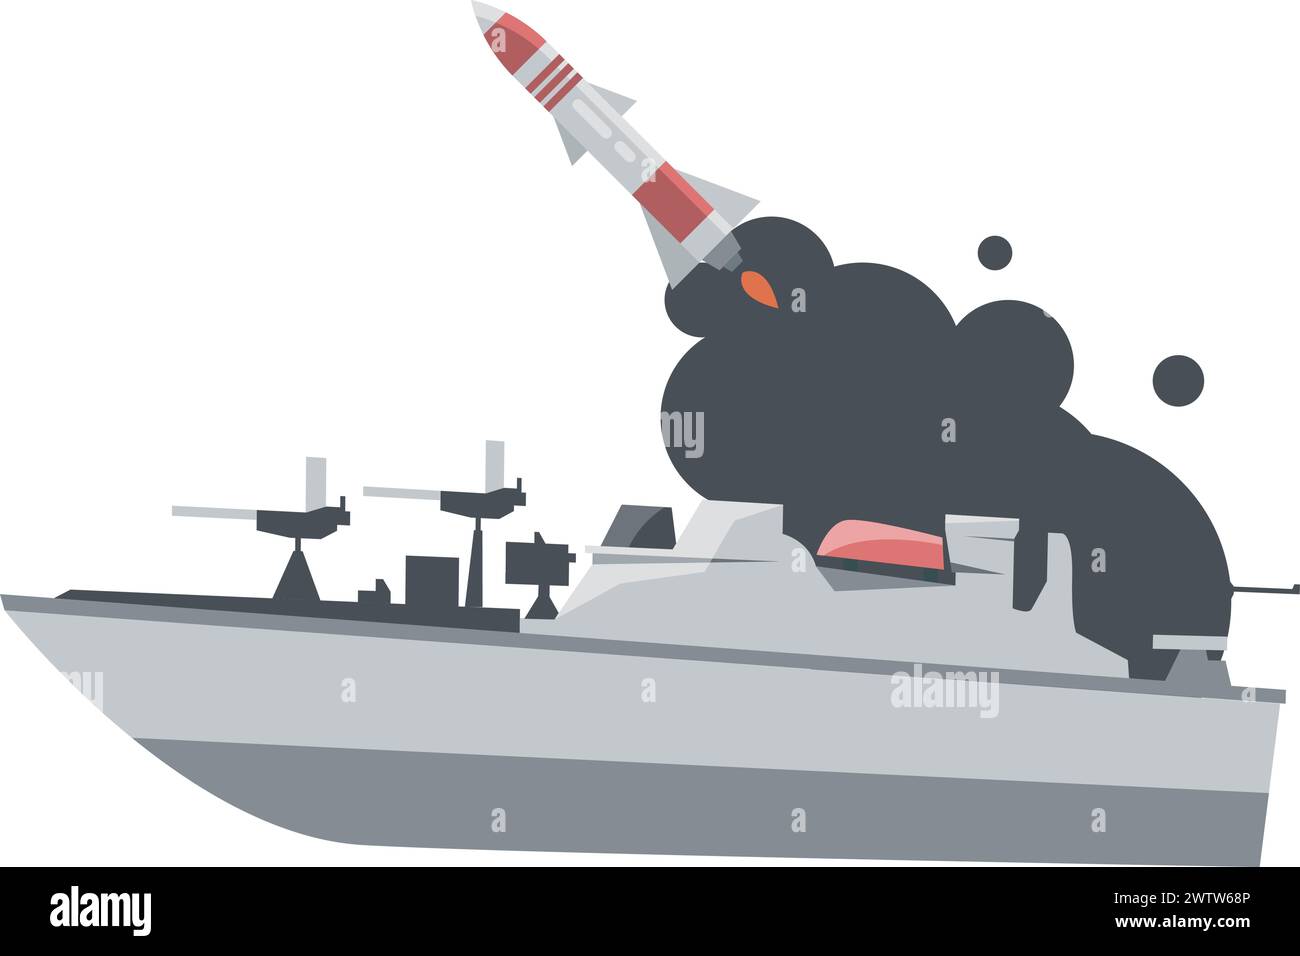 Warship launch rocket. Navy force weapon icon Stock Vector